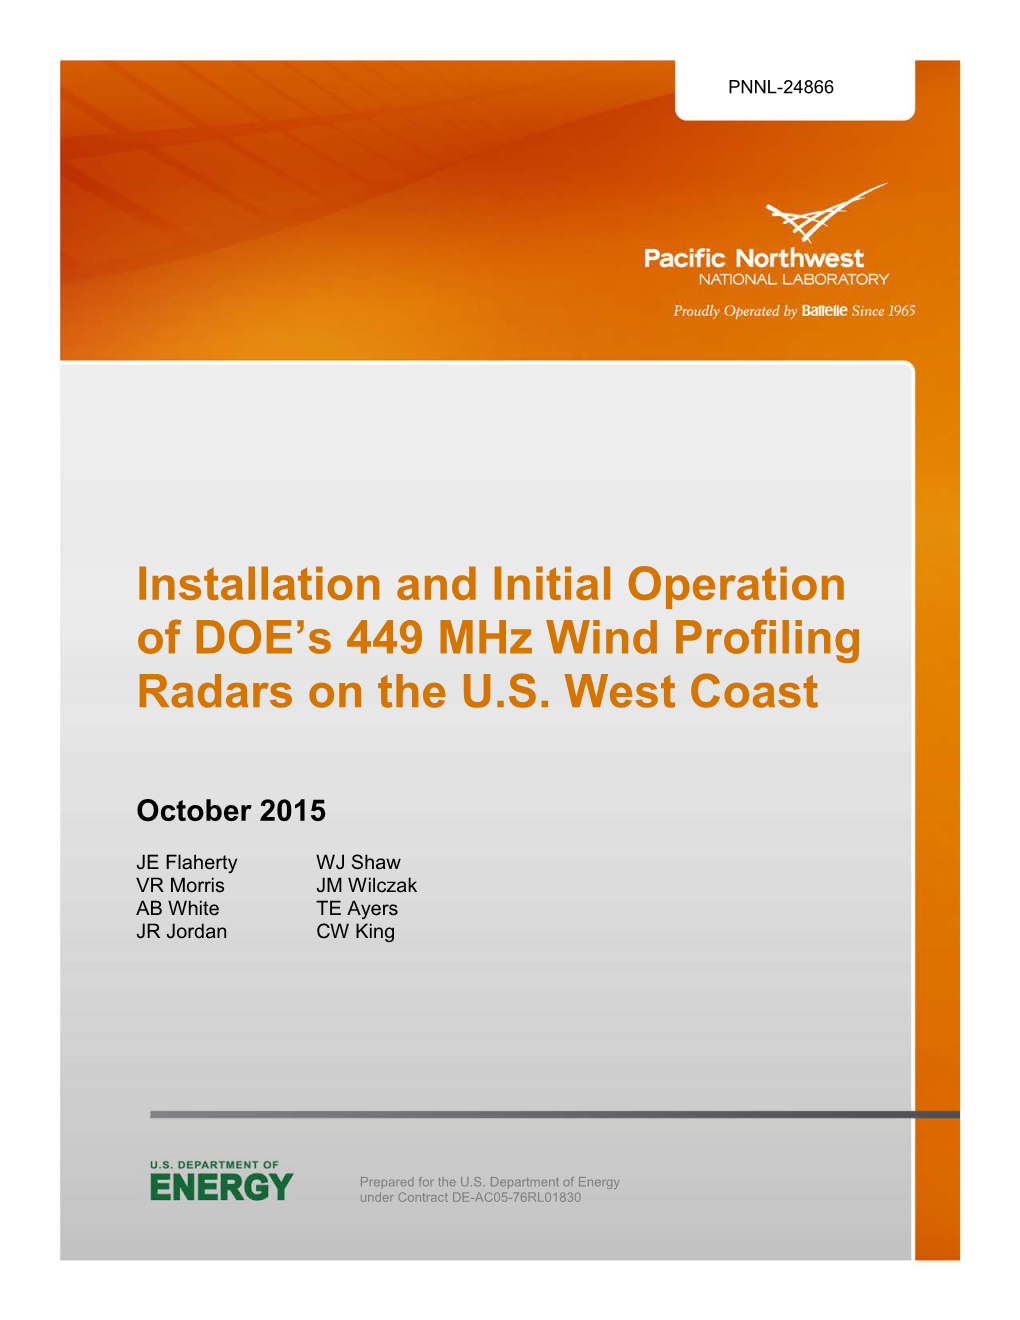 Installation and Initial Operation of DOE's 449 Mhz Wind Profiling